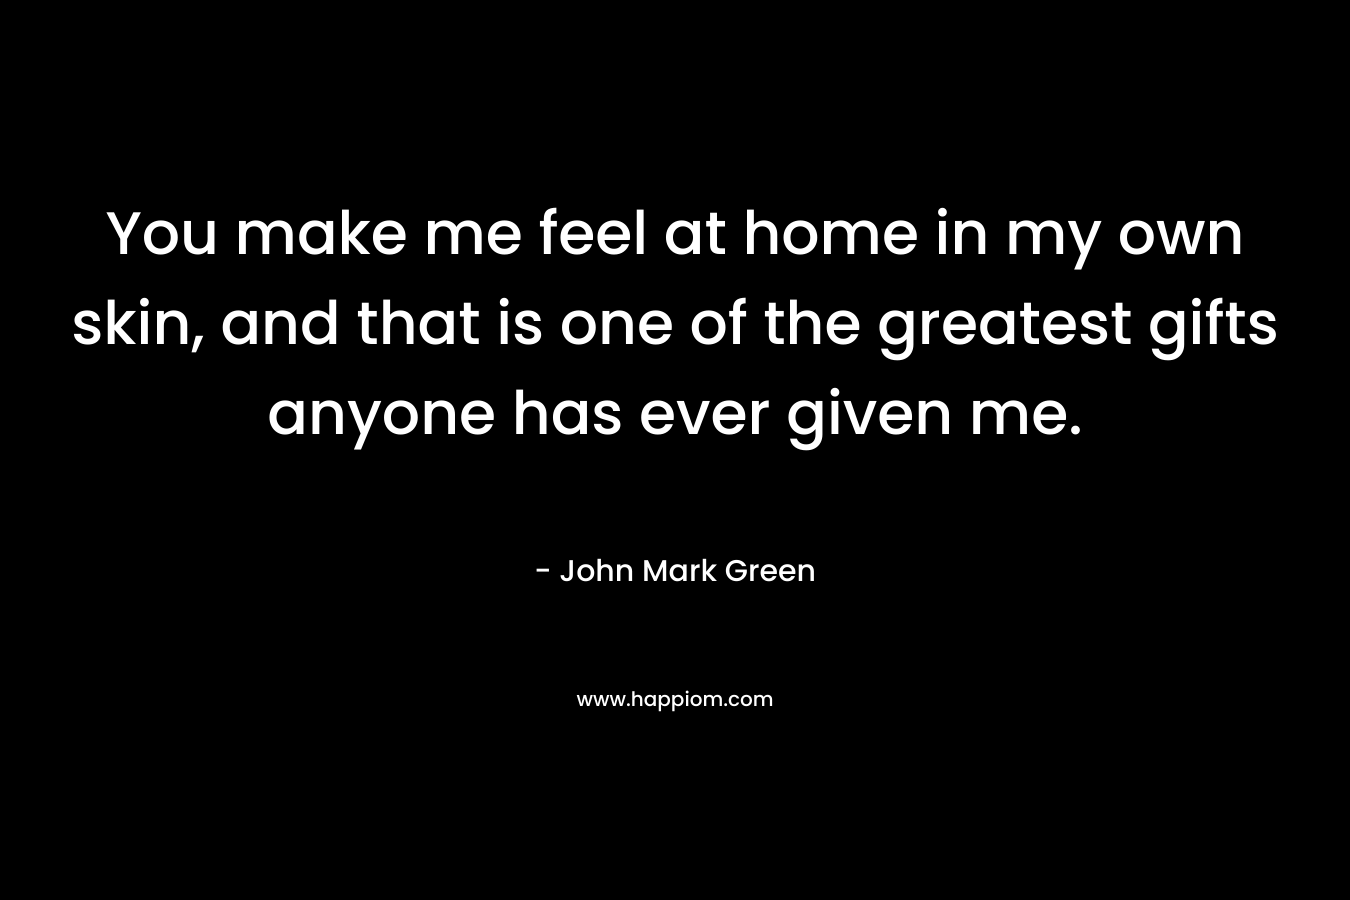 You make me feel at home in my own skin, and that is one of the greatest gifts anyone has ever given me.